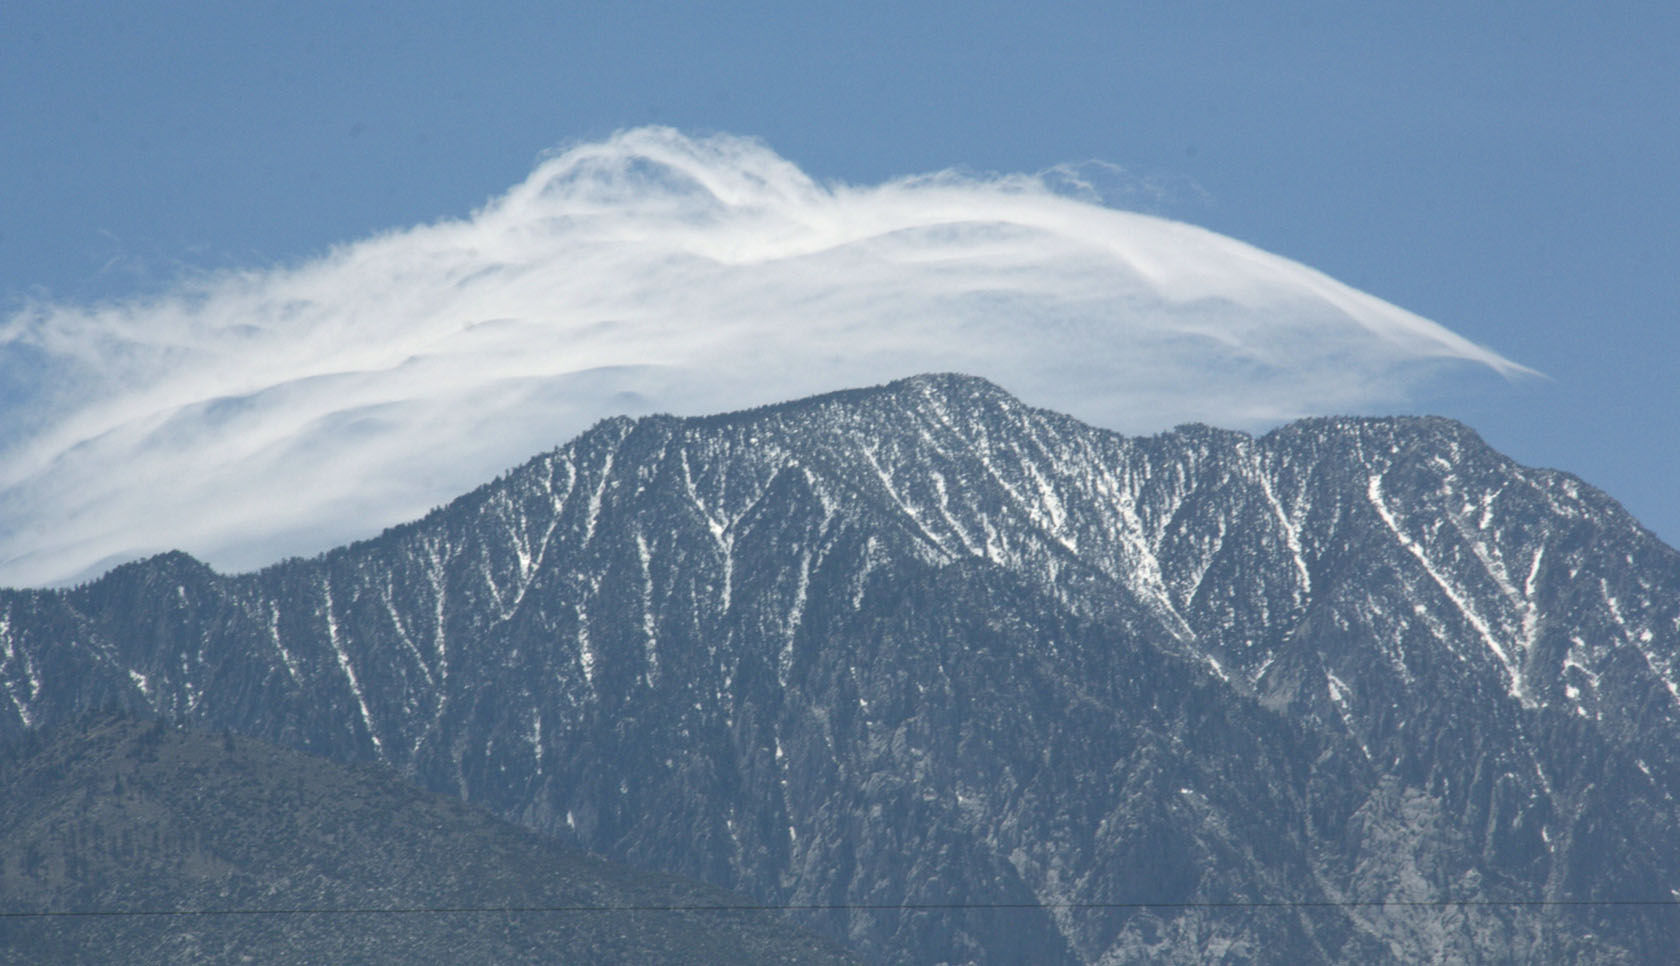 Mt San Jacinto #DesertTour Things to do in Palm Springs #PalmSprings